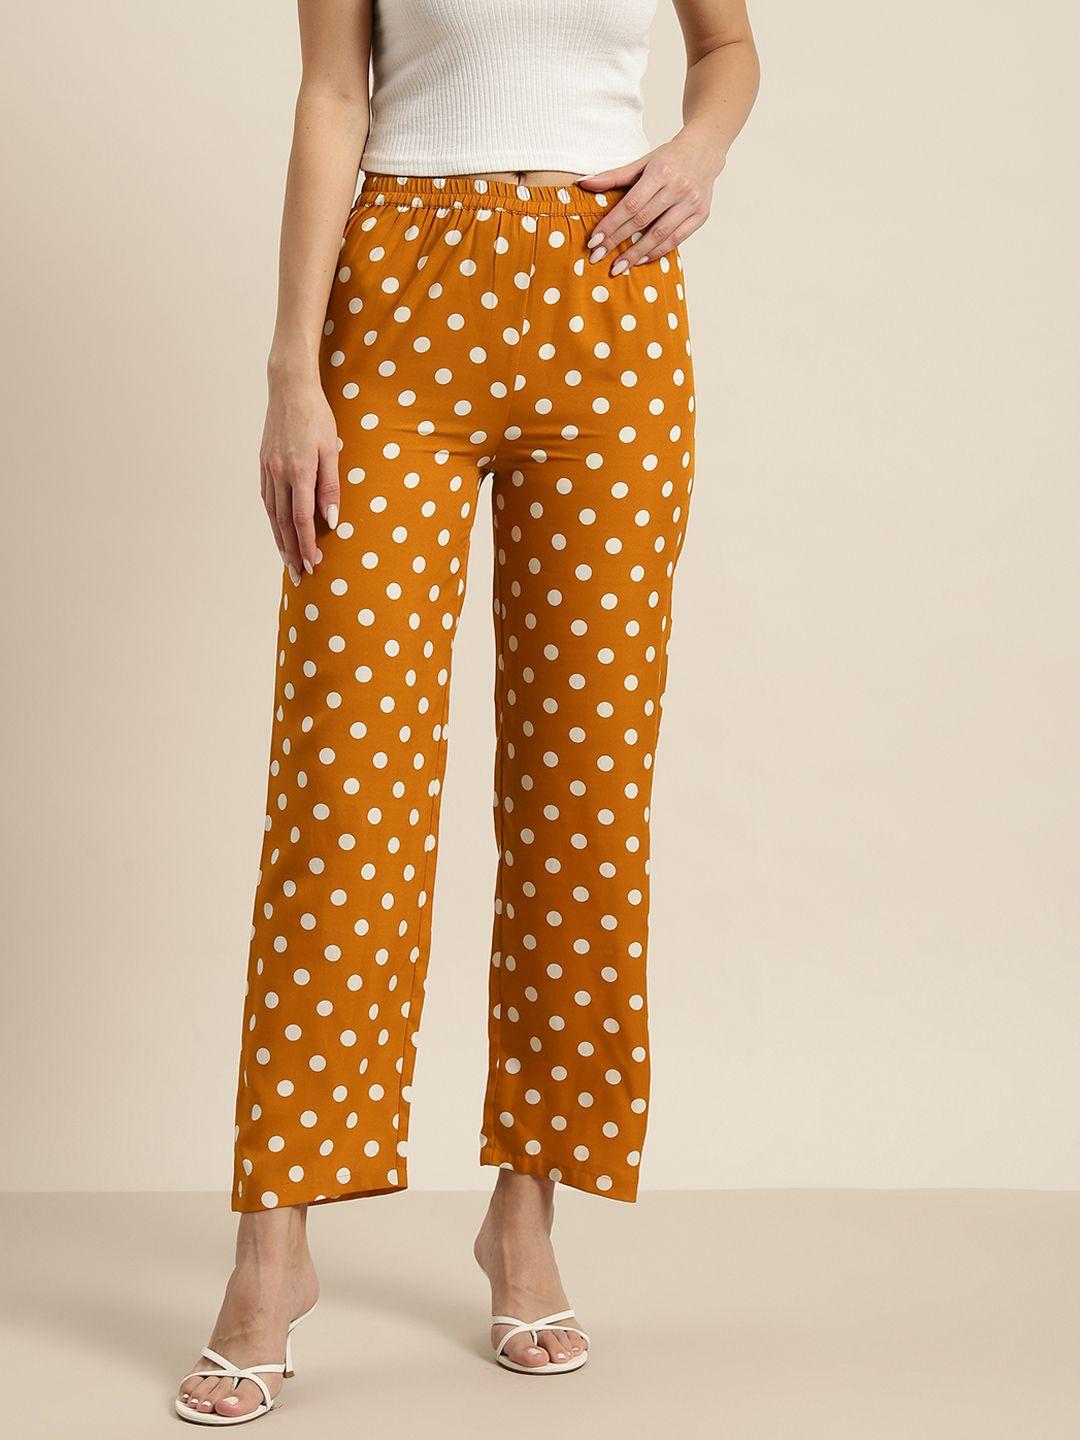 qurvii polka dots printed comfort high-rise easy wash trousers